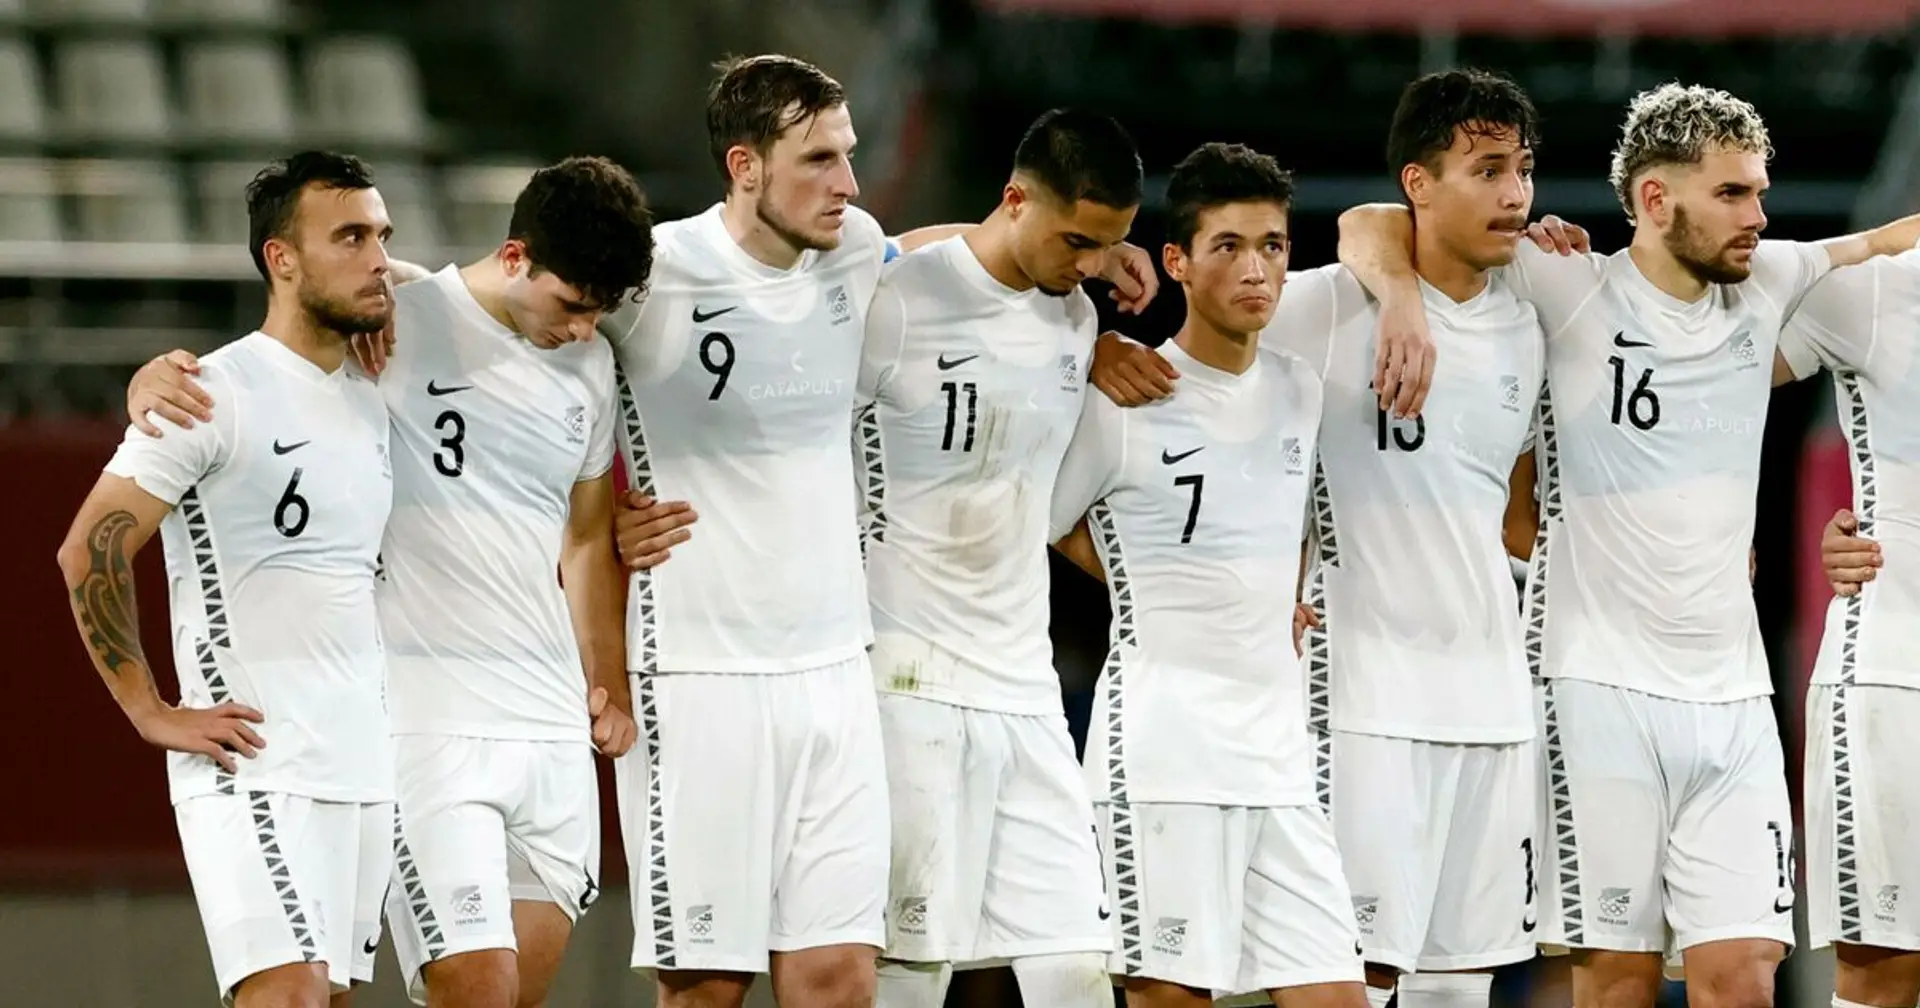 New Zealand team might be forced to drop All Whites nickname due to racism concerns